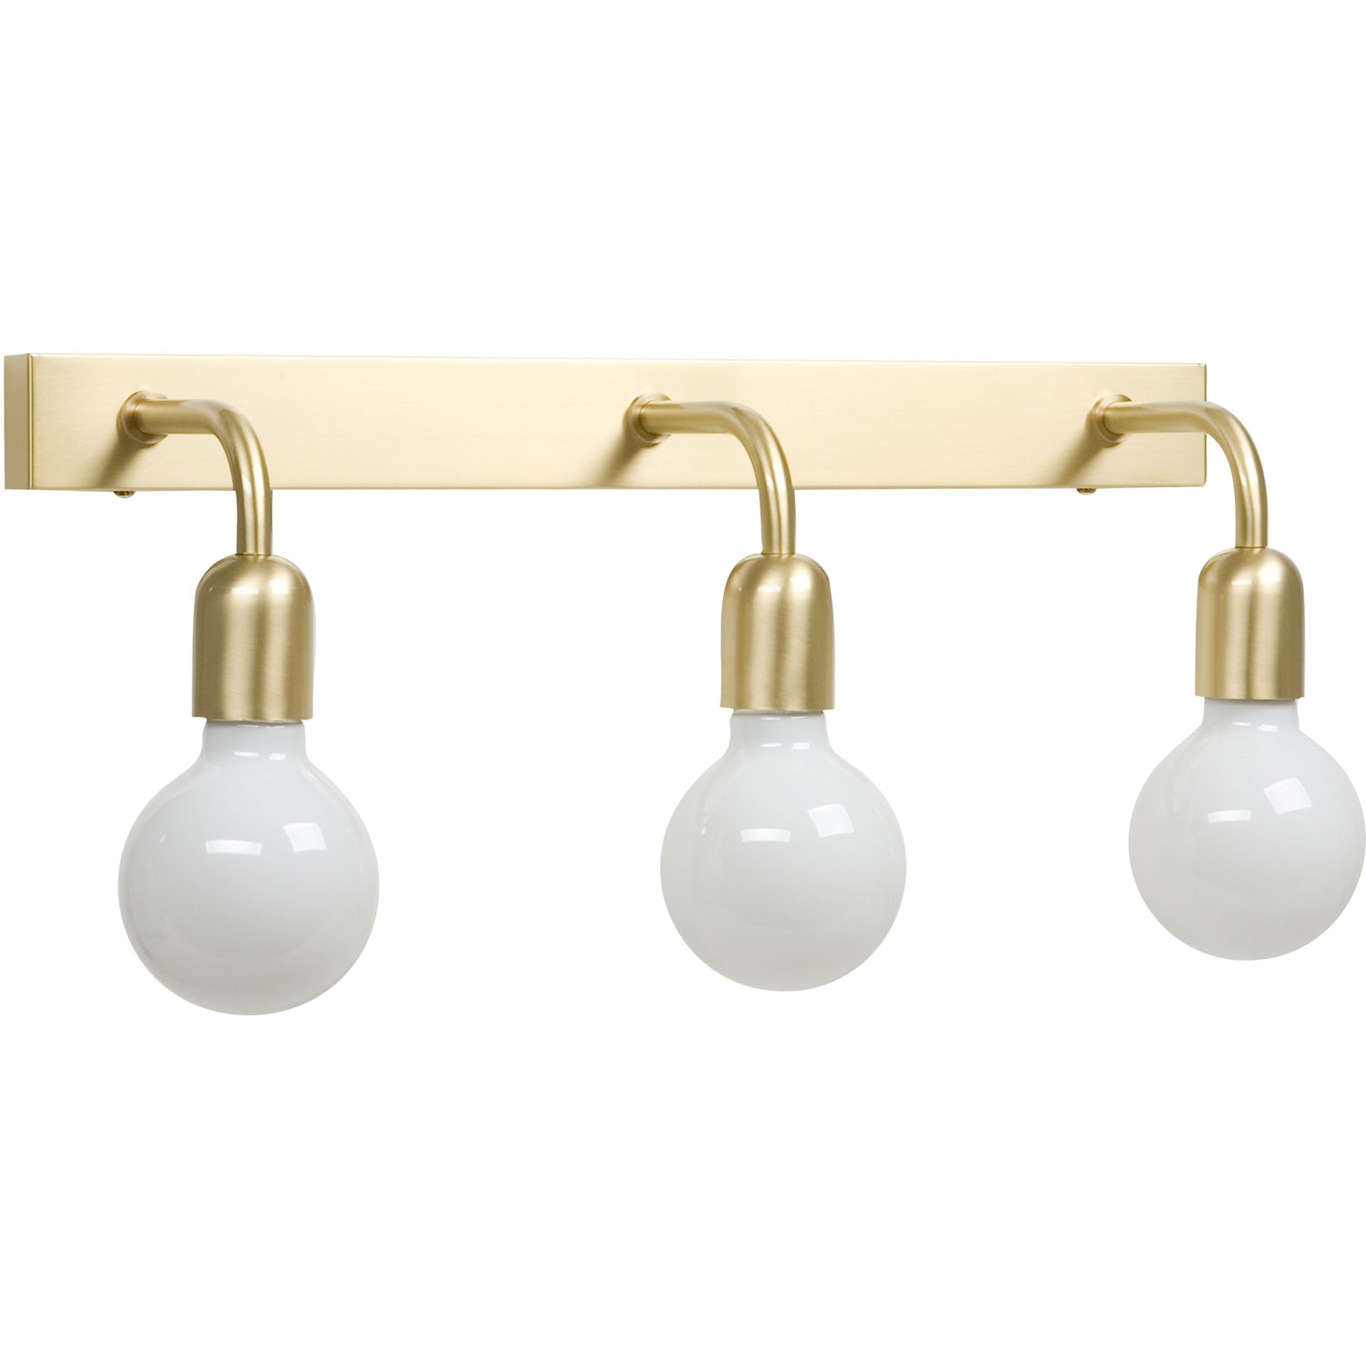 Regal 3 Wall Lamp, Brushed Brass